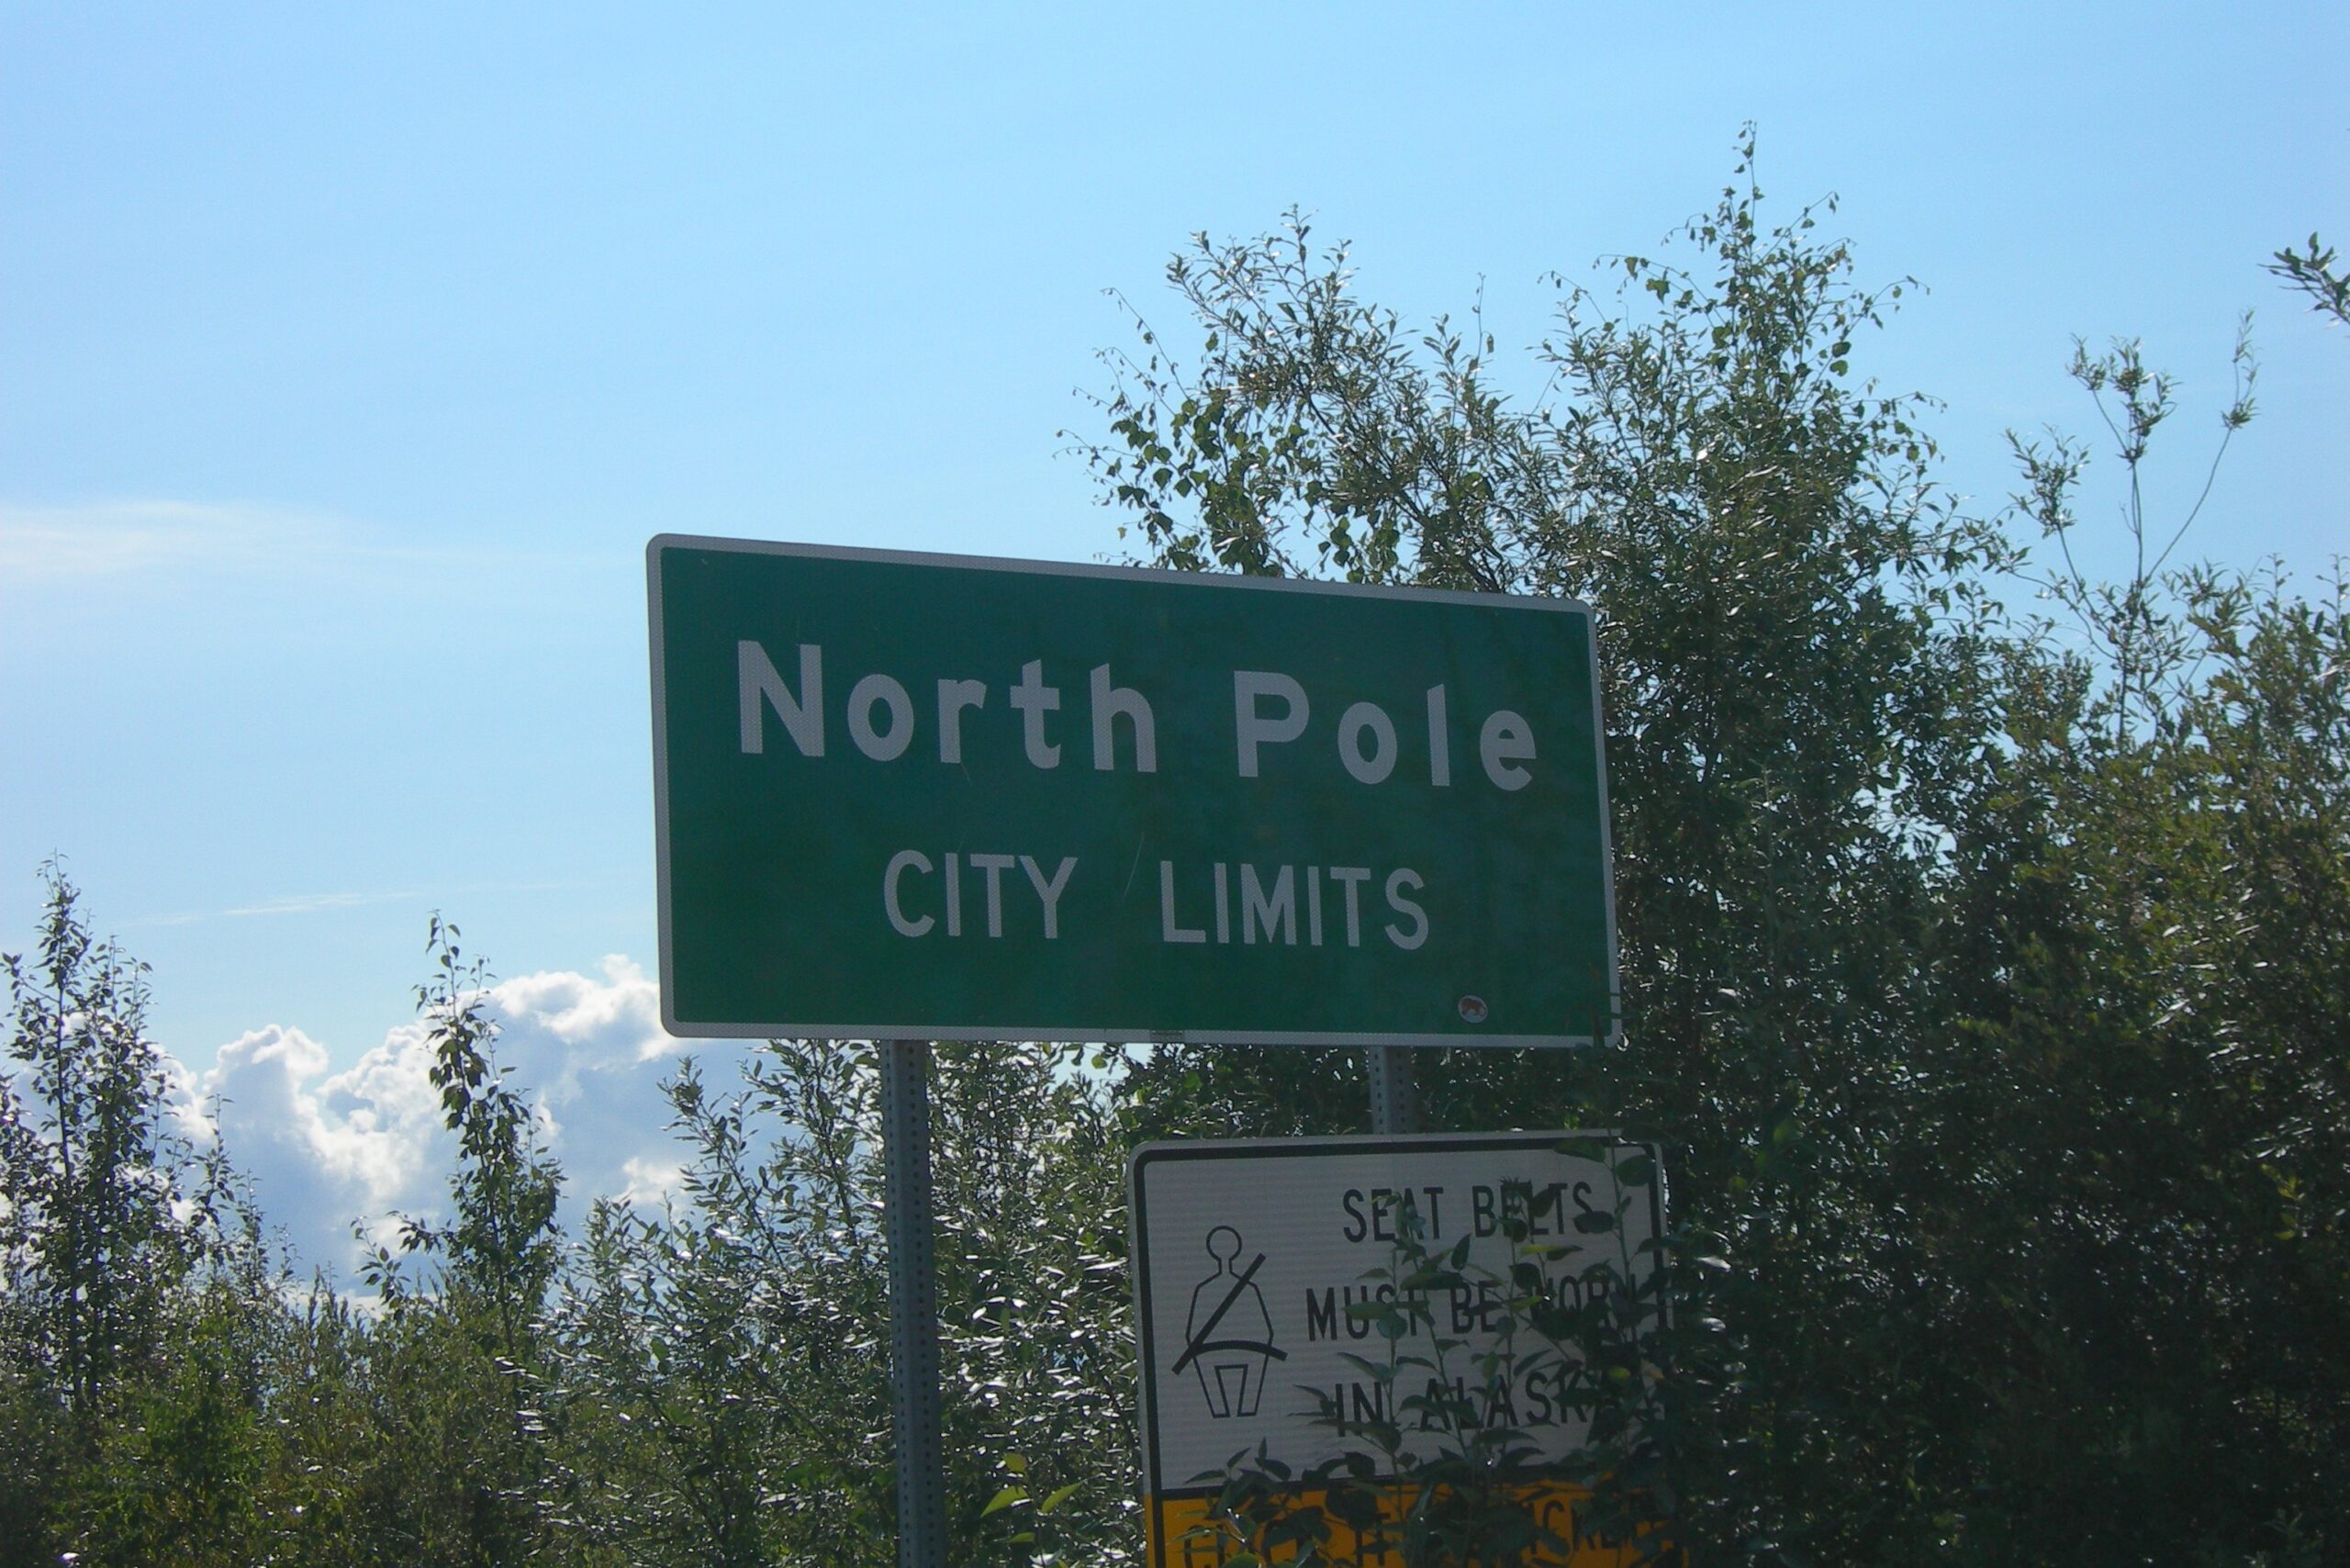 A street sign says North Pole City Limits